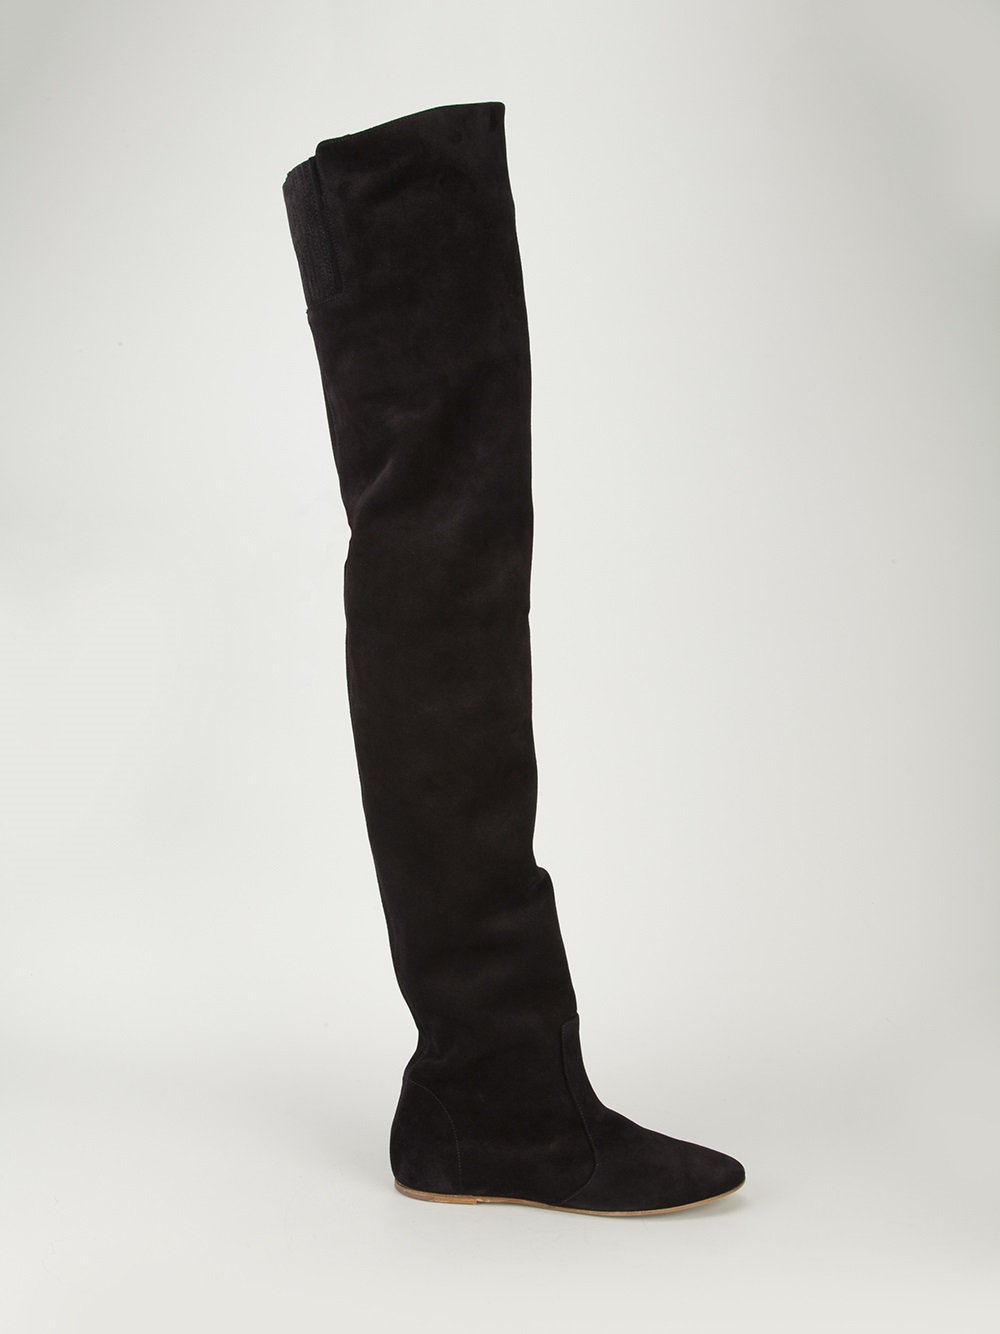 black suede thigh high boots flat